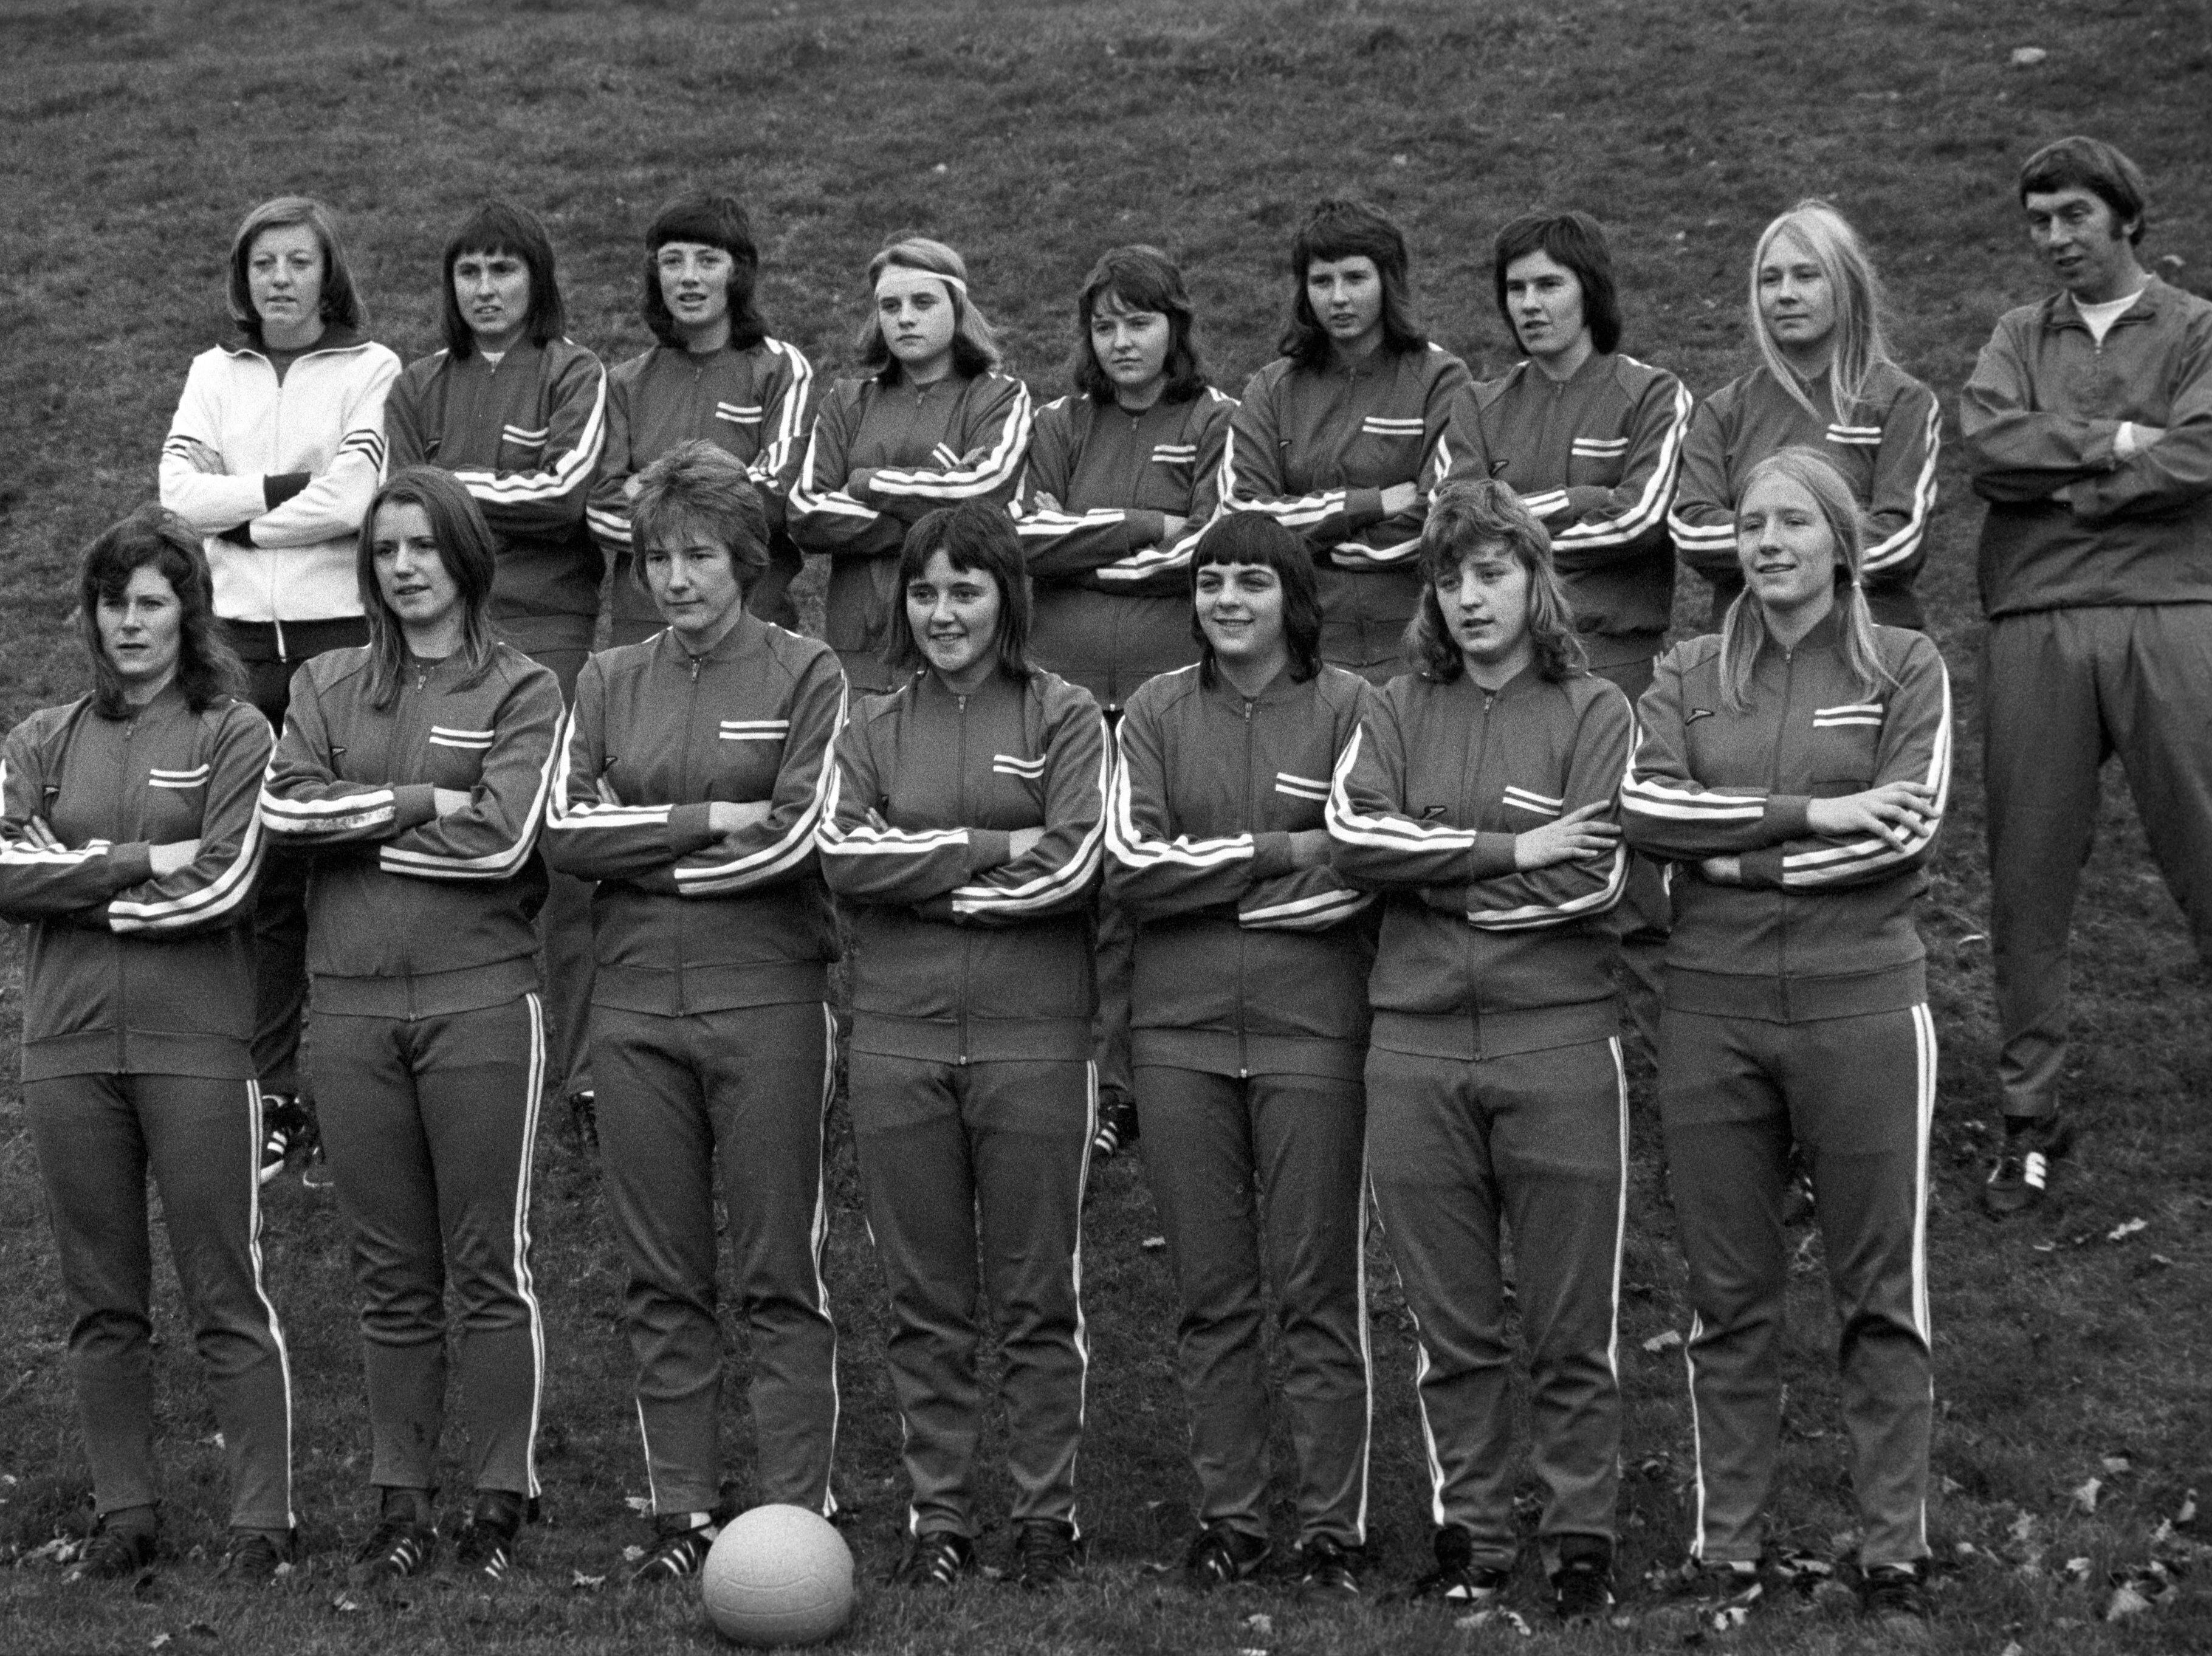 Key moments from the history of women's football 